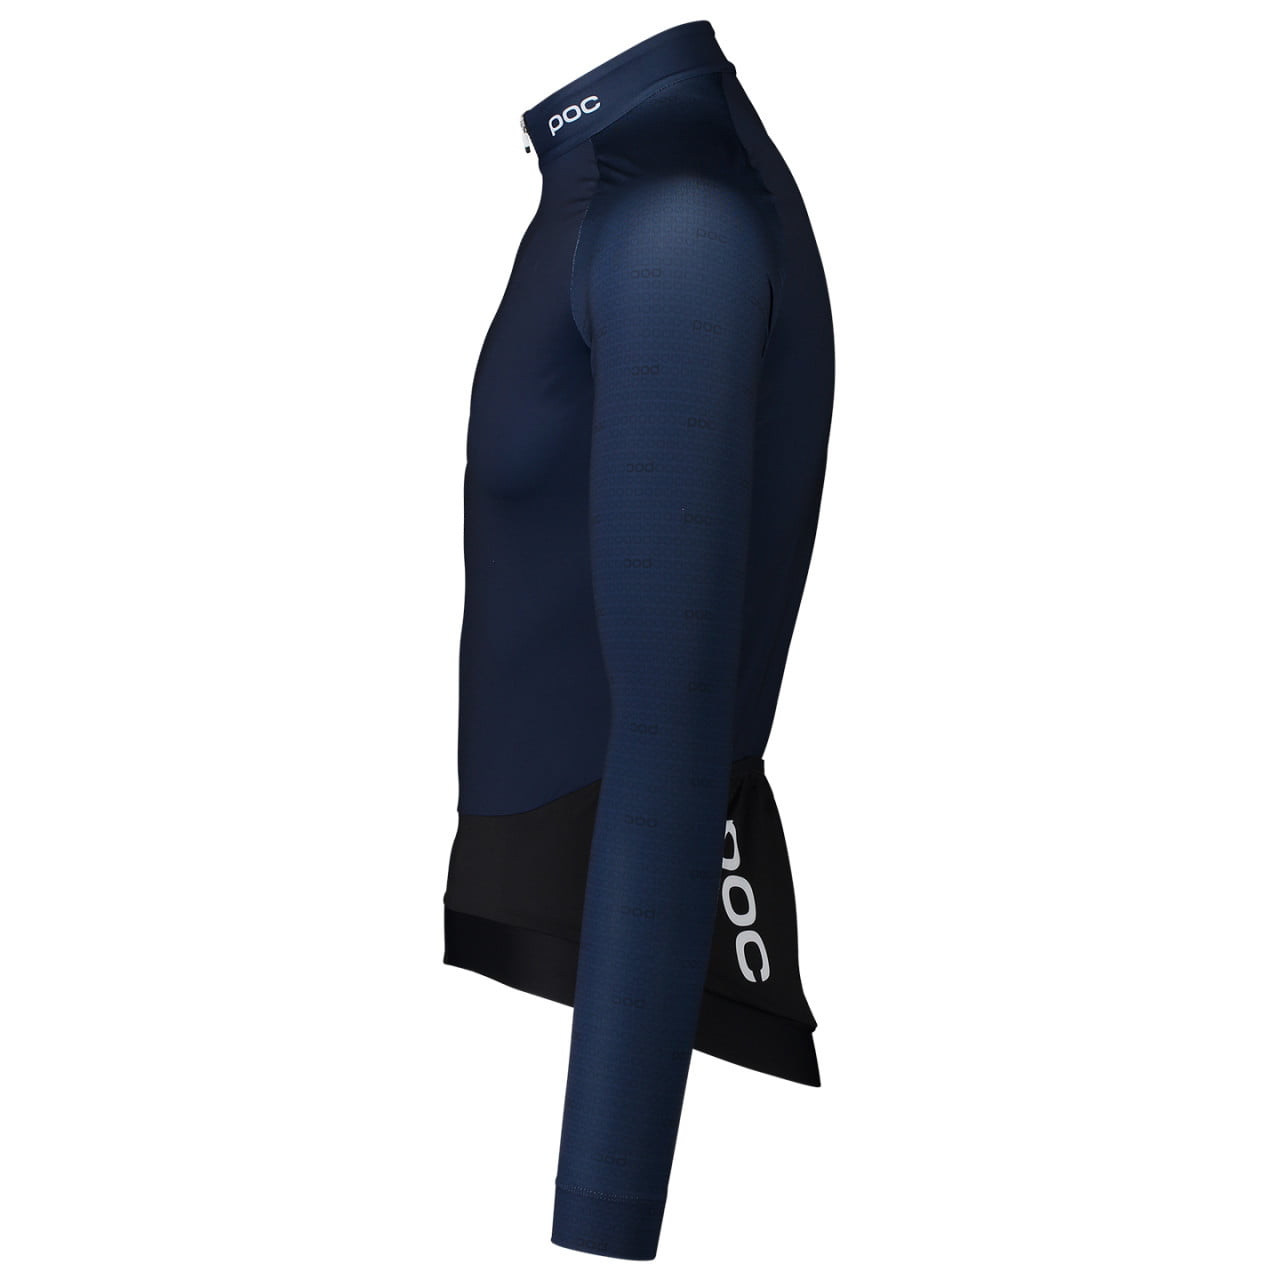 Maillot manches longues Essential Road